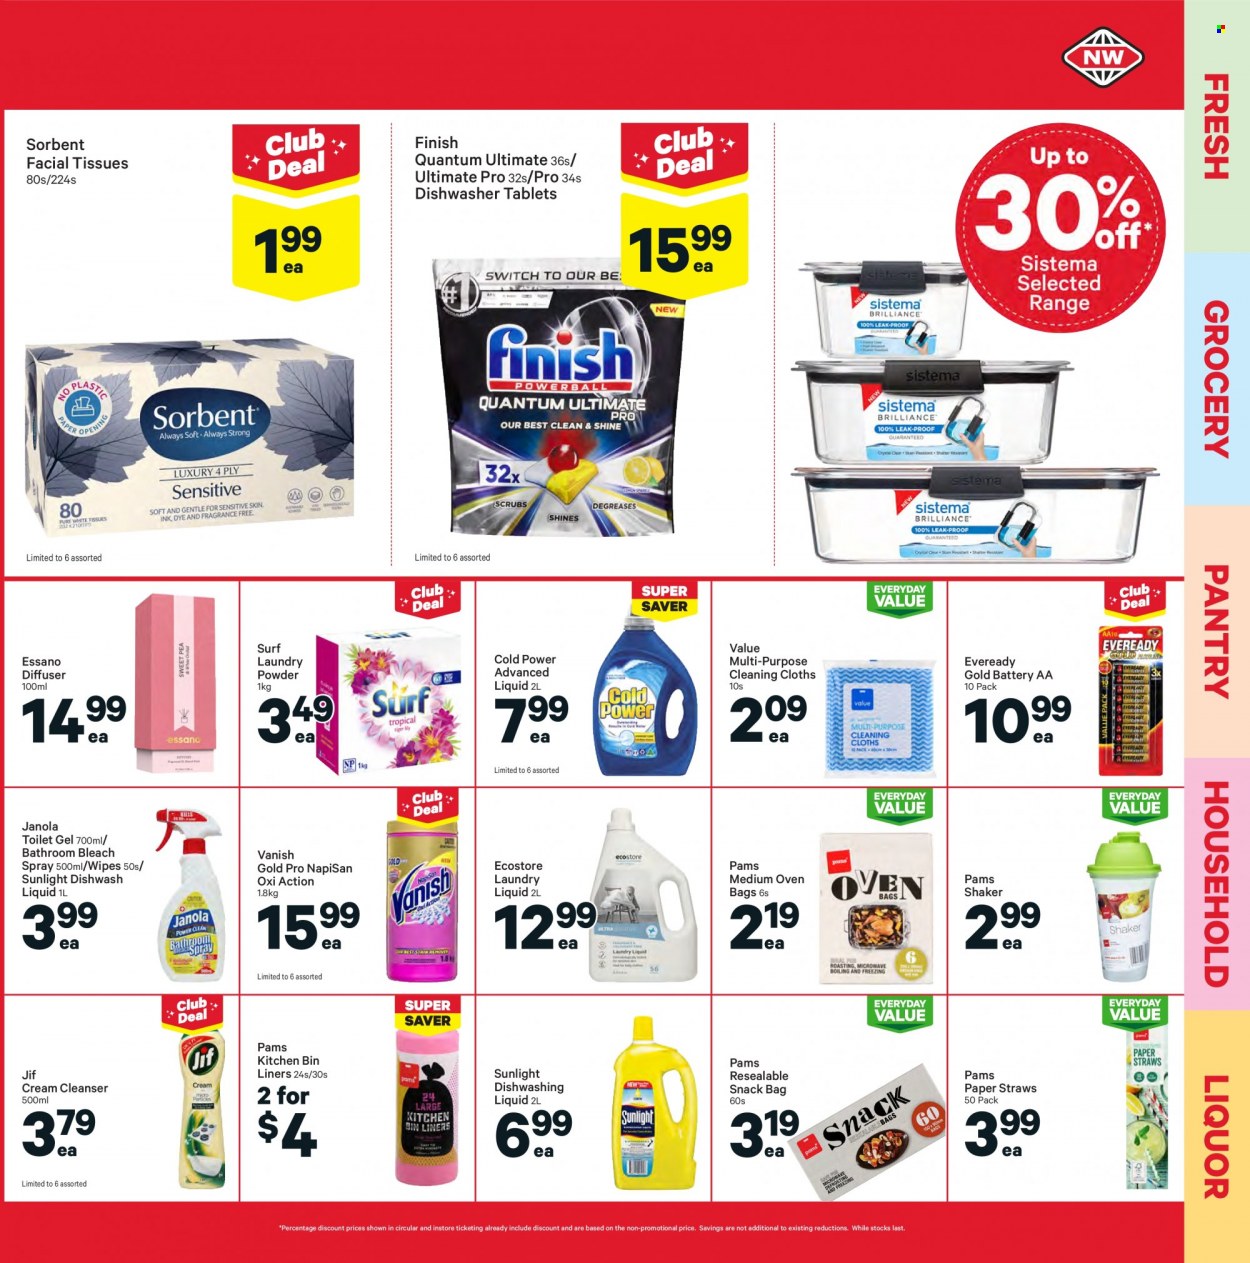 thumbnail - New World mailer - 13.09.2021 - 19.09.2021 - Sales products - Jif, switch, liquor, wipes, tissues, bleach, Vanish, laundry detergent, laundry powder, Sunlight, Surf, dishwashing liquid, dishwasher cleaner, Finish Powerball, Finish Quantum Ultimate, dishwasher tablets, cleanser, facial tissues, Essano, bag, bin, shaker, straw, paper, diffuser, battery, Eveready. Page 25.